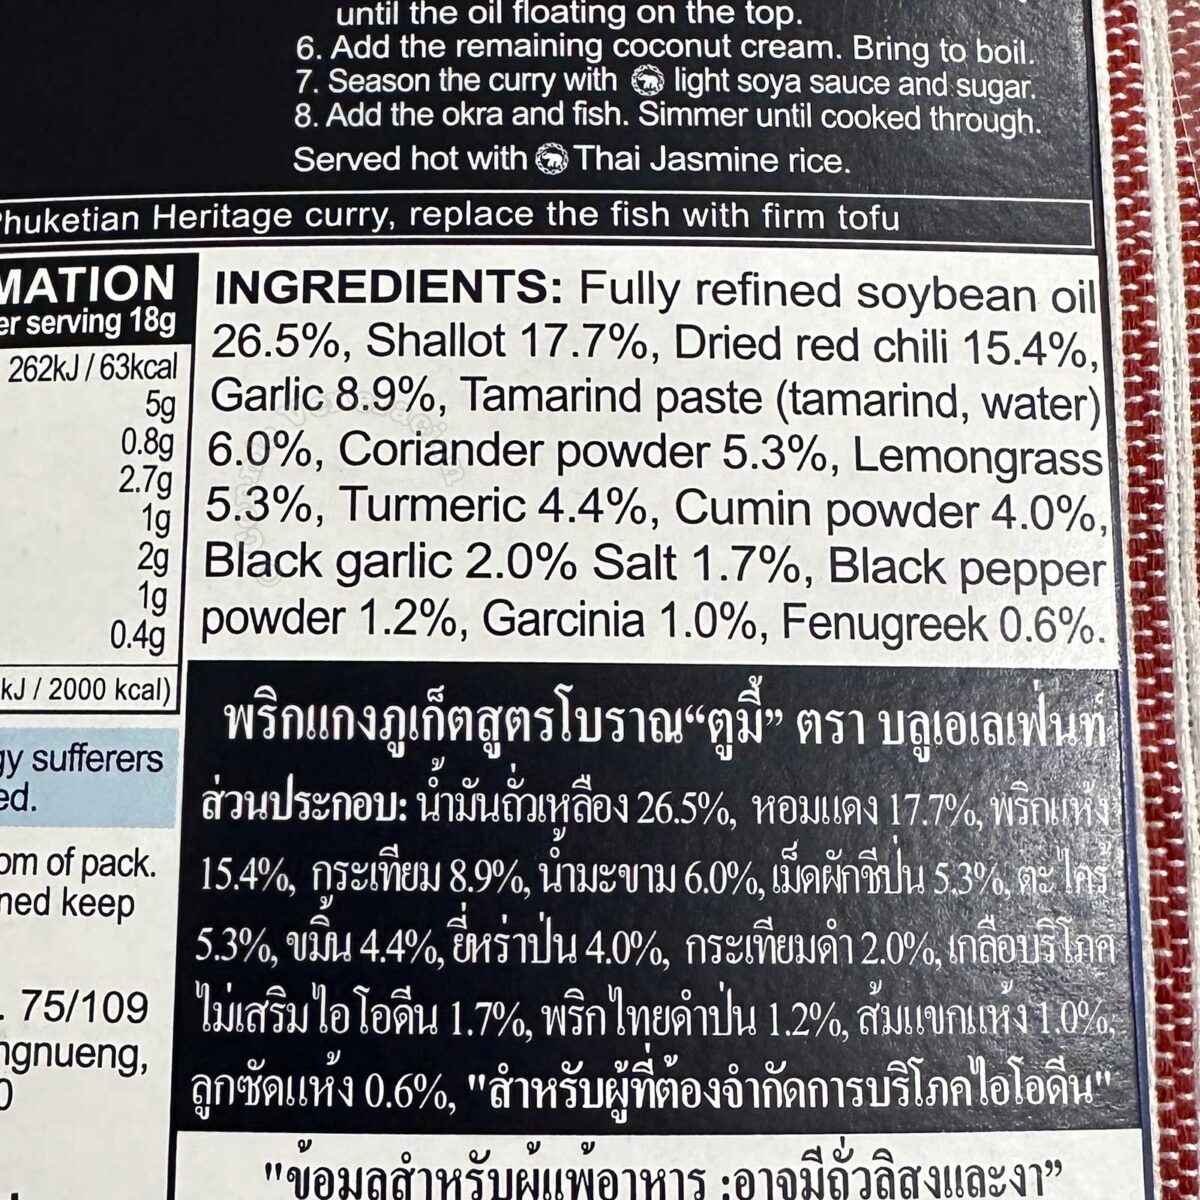 Ingredients list of Phuketian heritage curry curry paste from the Blue Elephant Restaurant in Bangkok